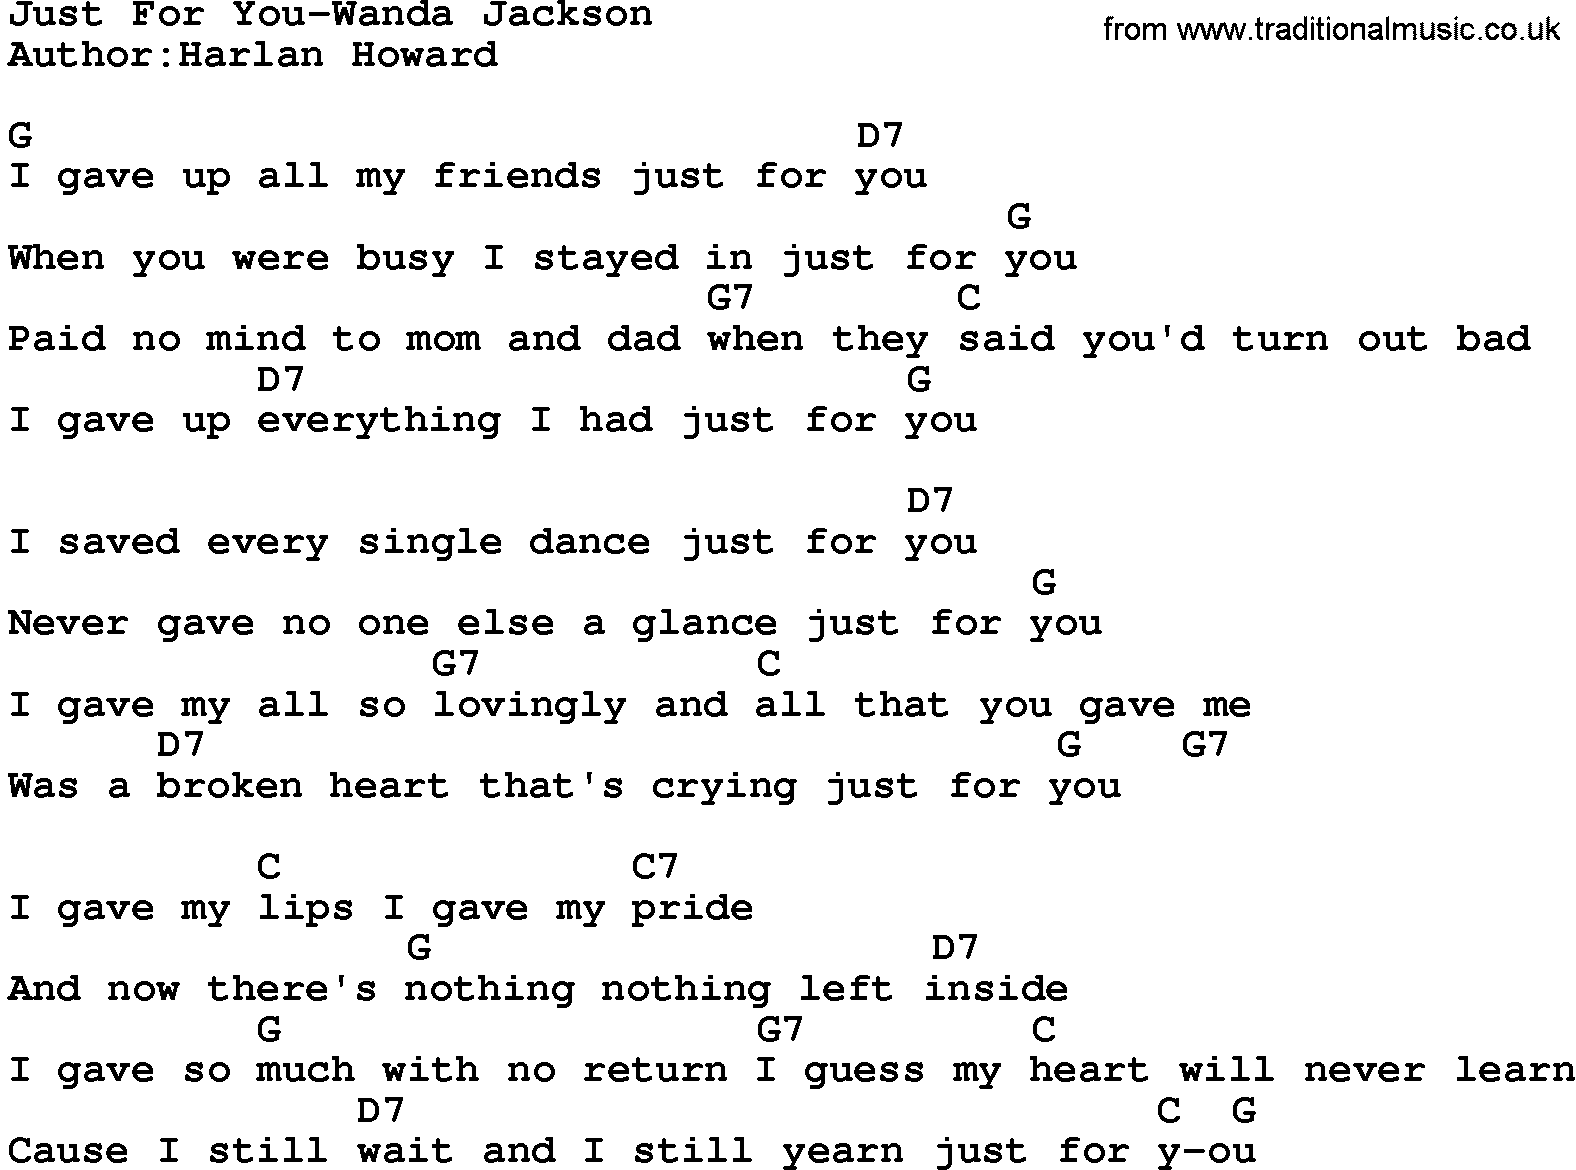 Country music song: Just For You-Wanda Jackson lyrics and chords